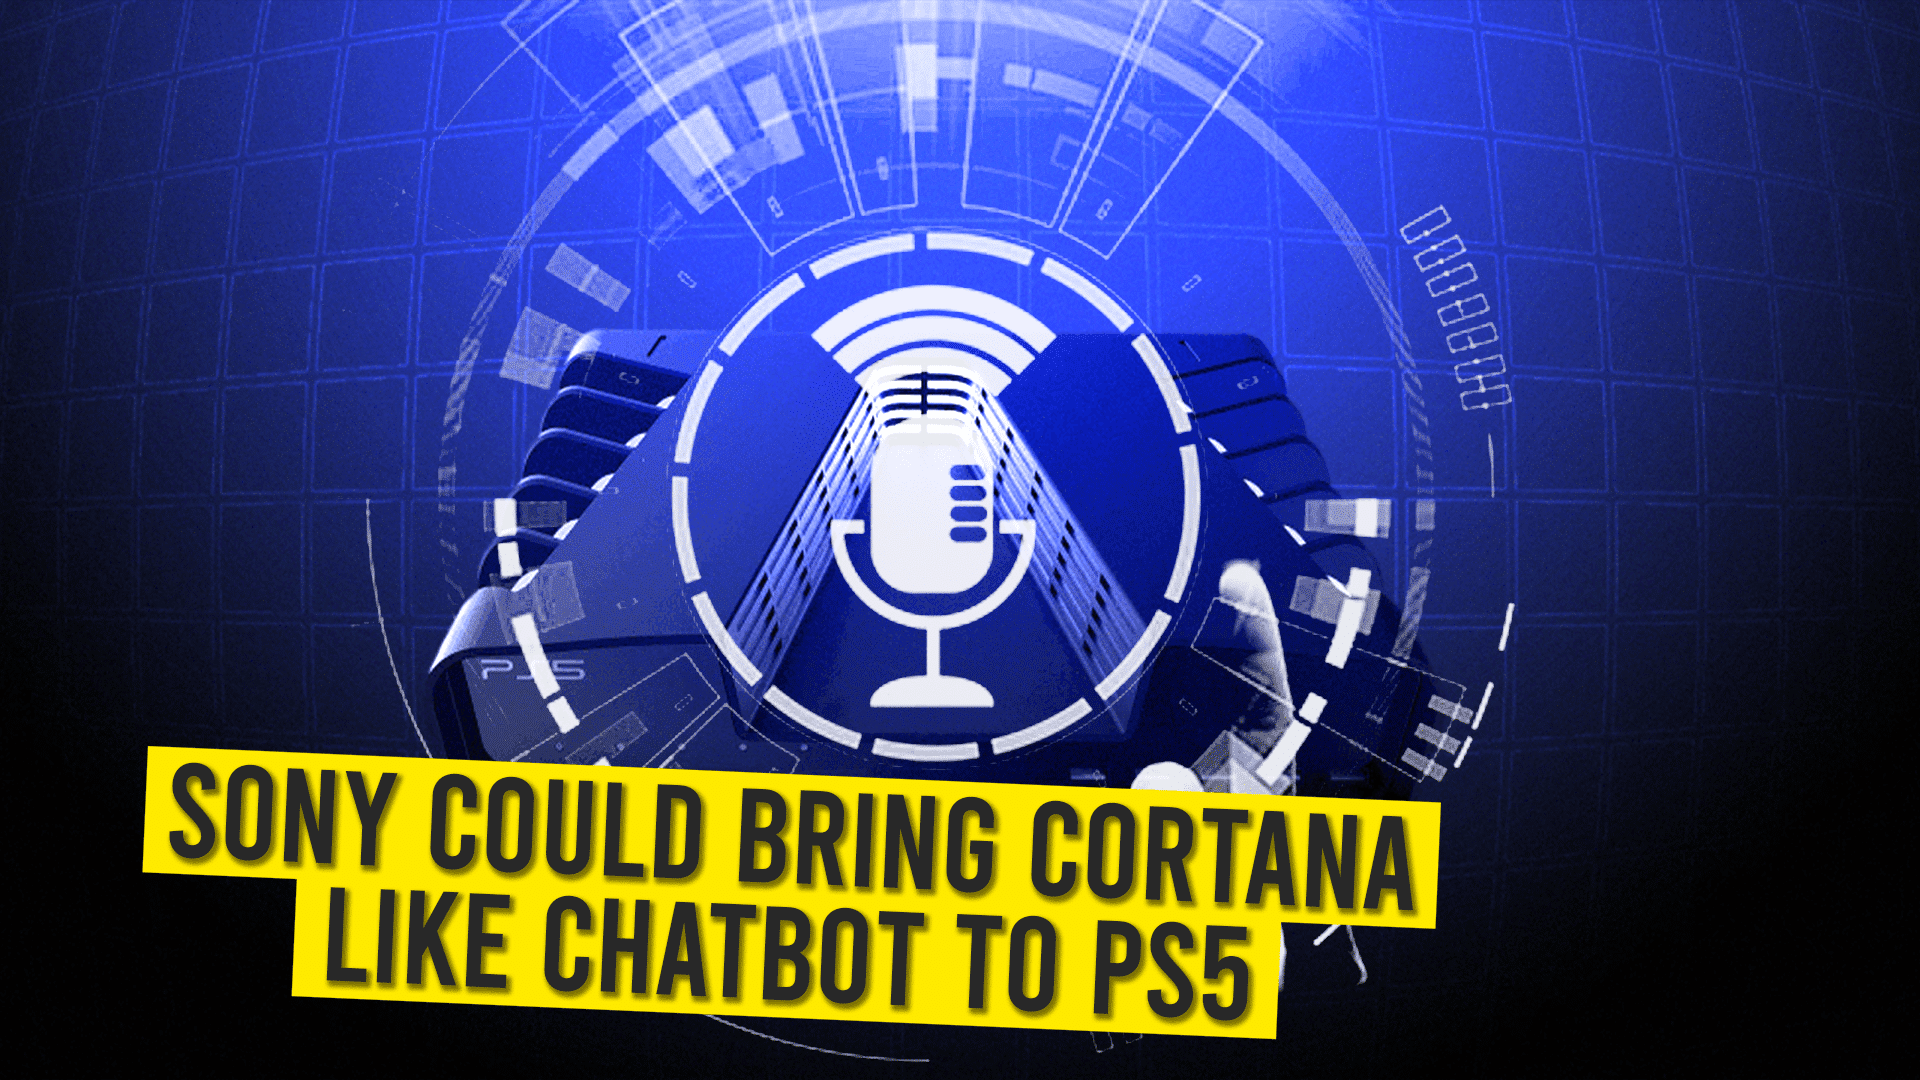 Sony Could Bring Cortana Like Chatbot To PS5